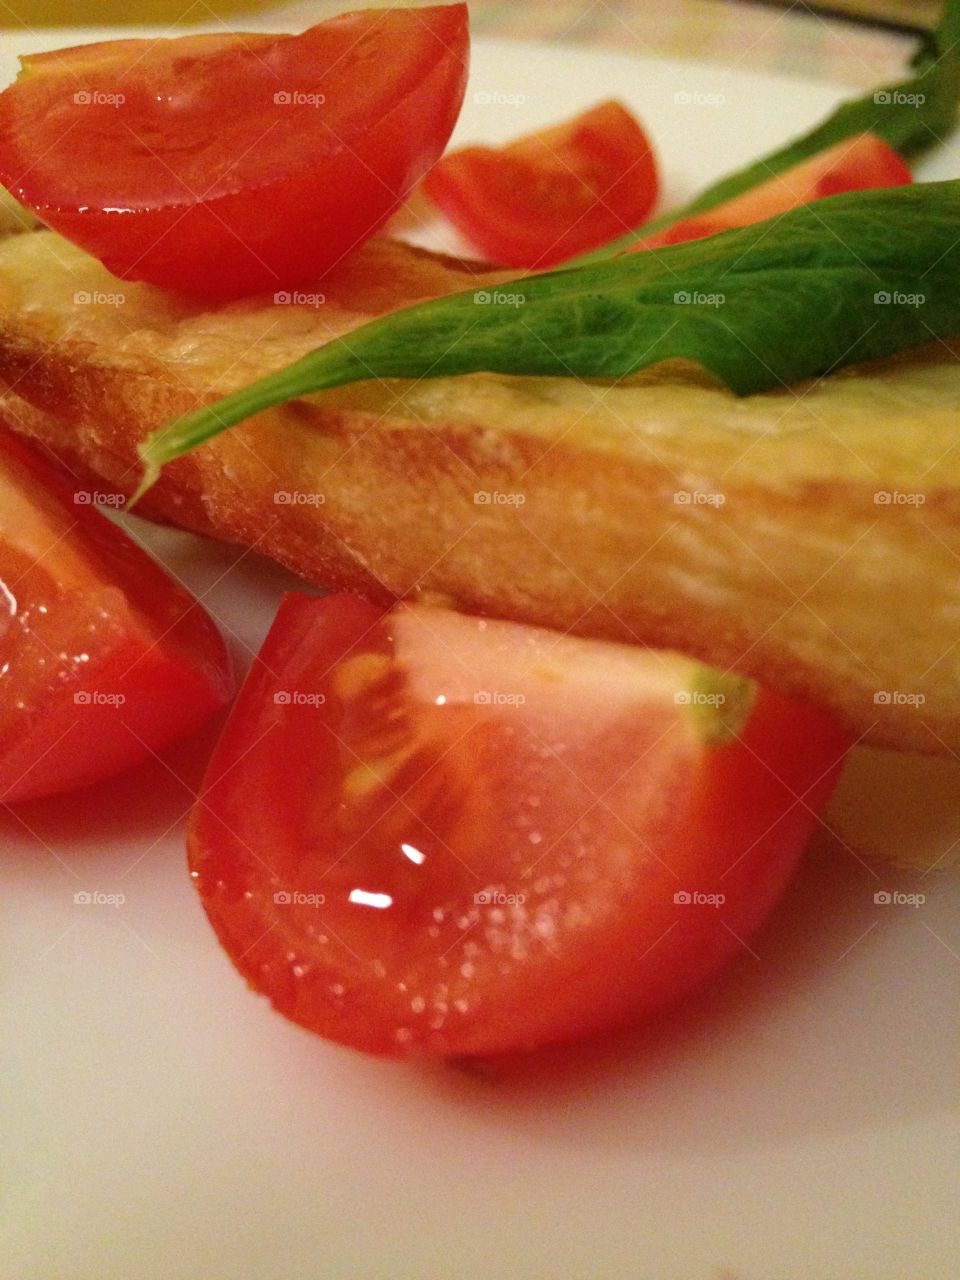 Cheese, tomato, bread. Whats for dinner